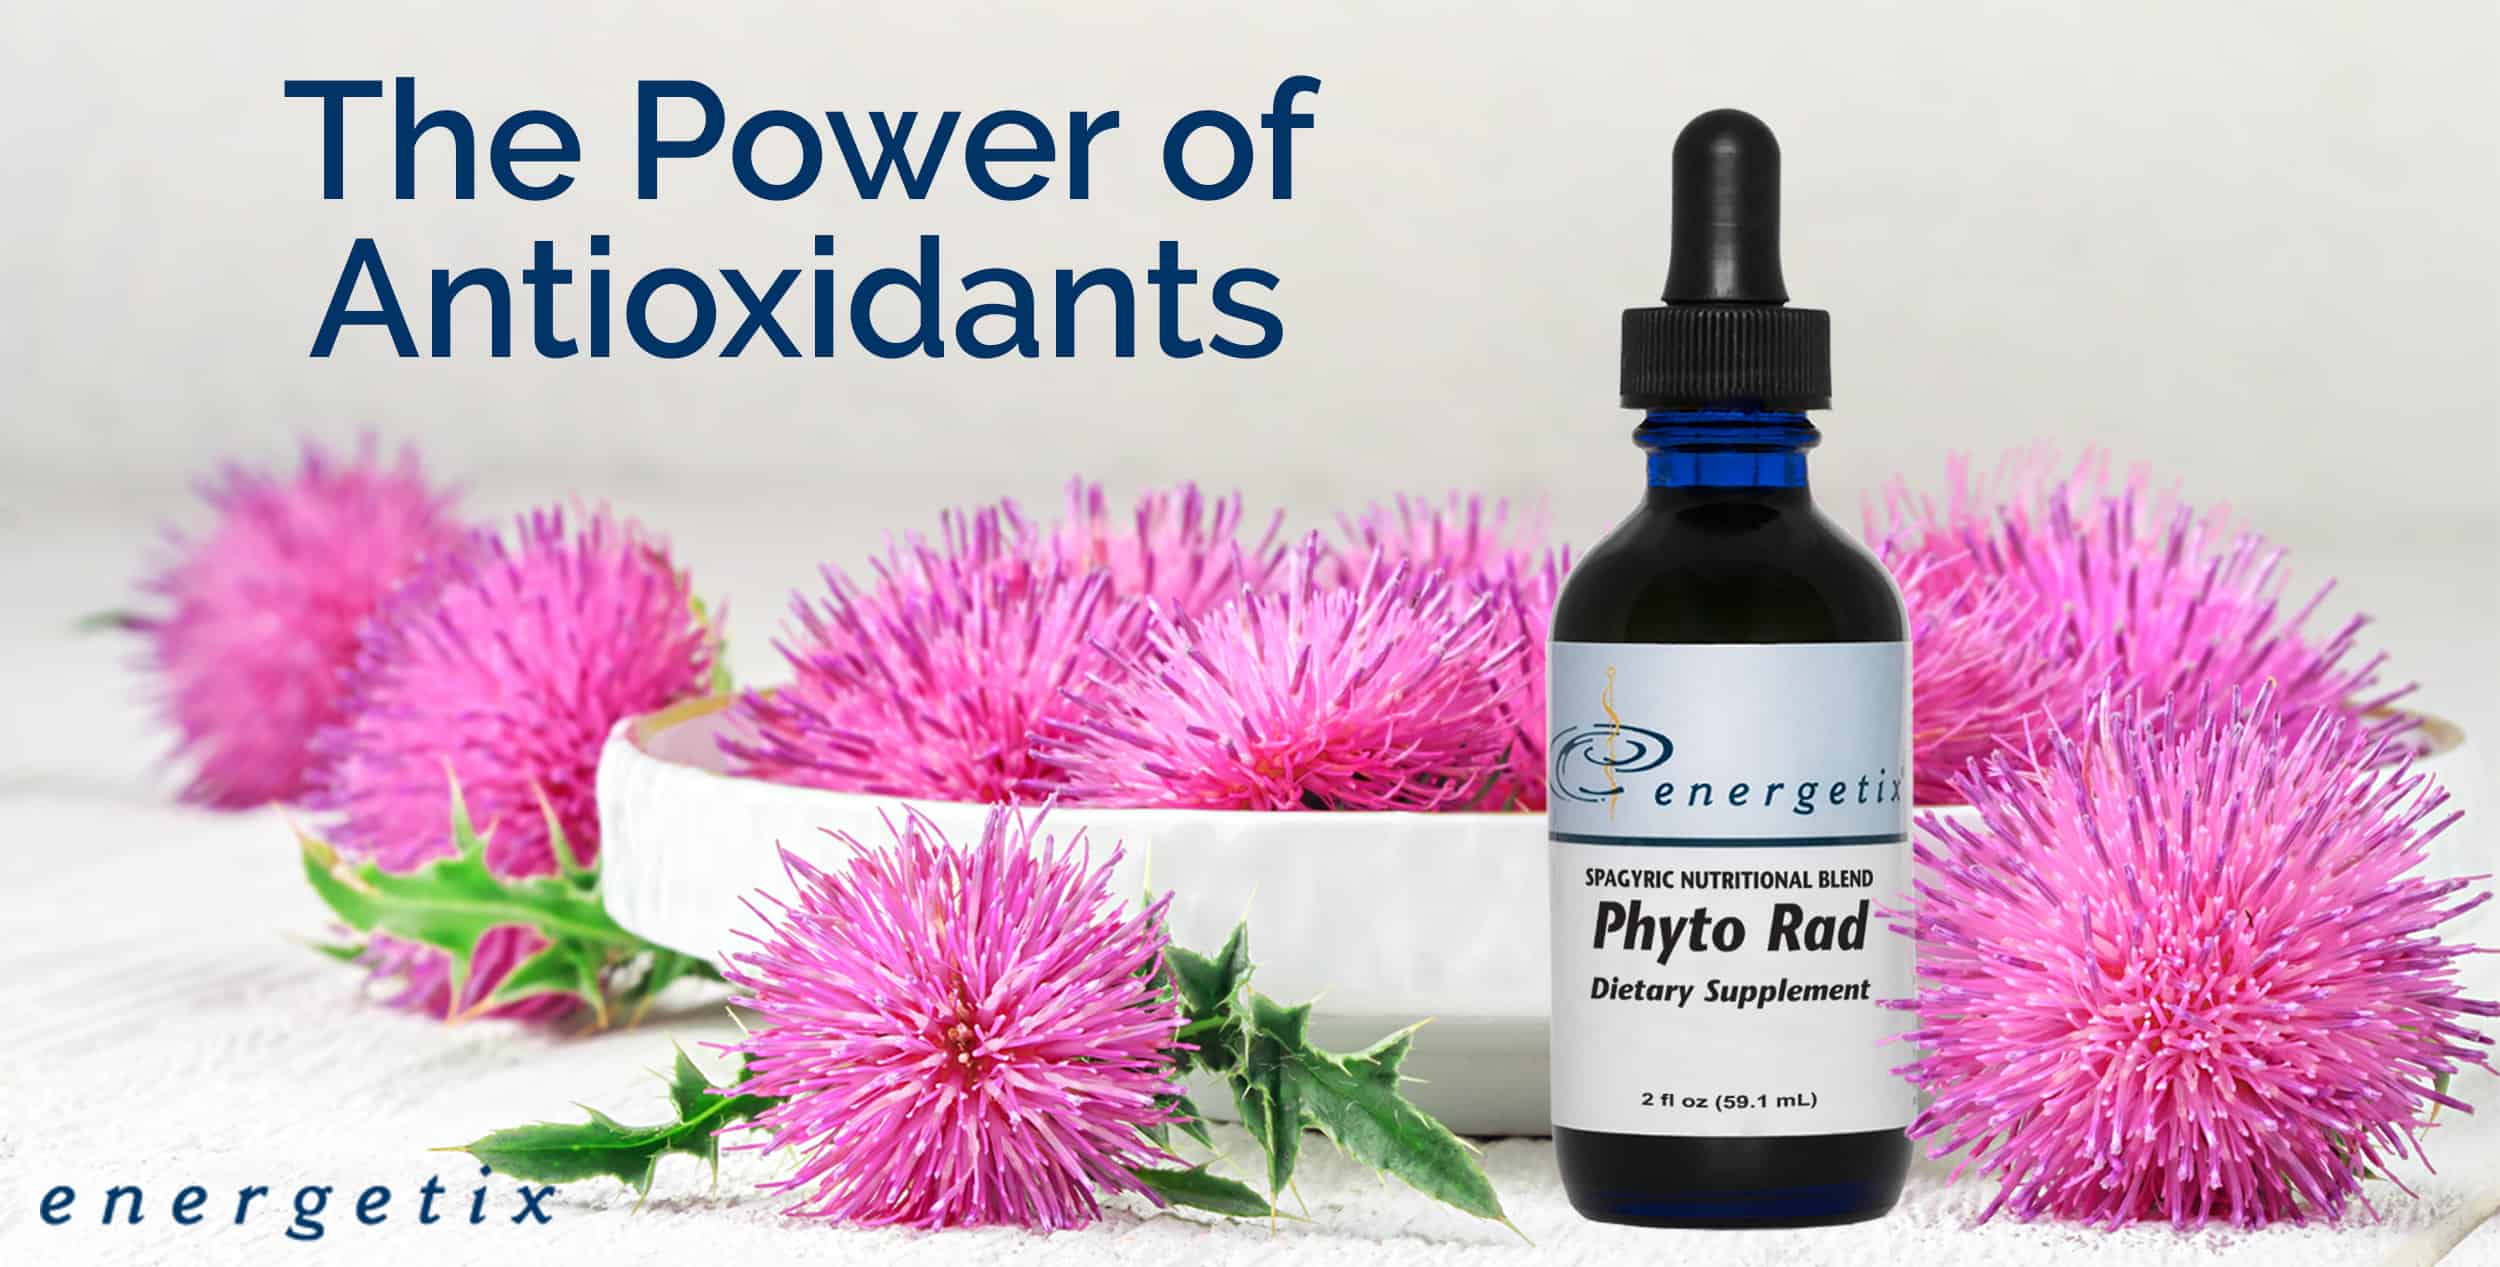 You are currently viewing 6 Antioxidants. 1 Great Product.